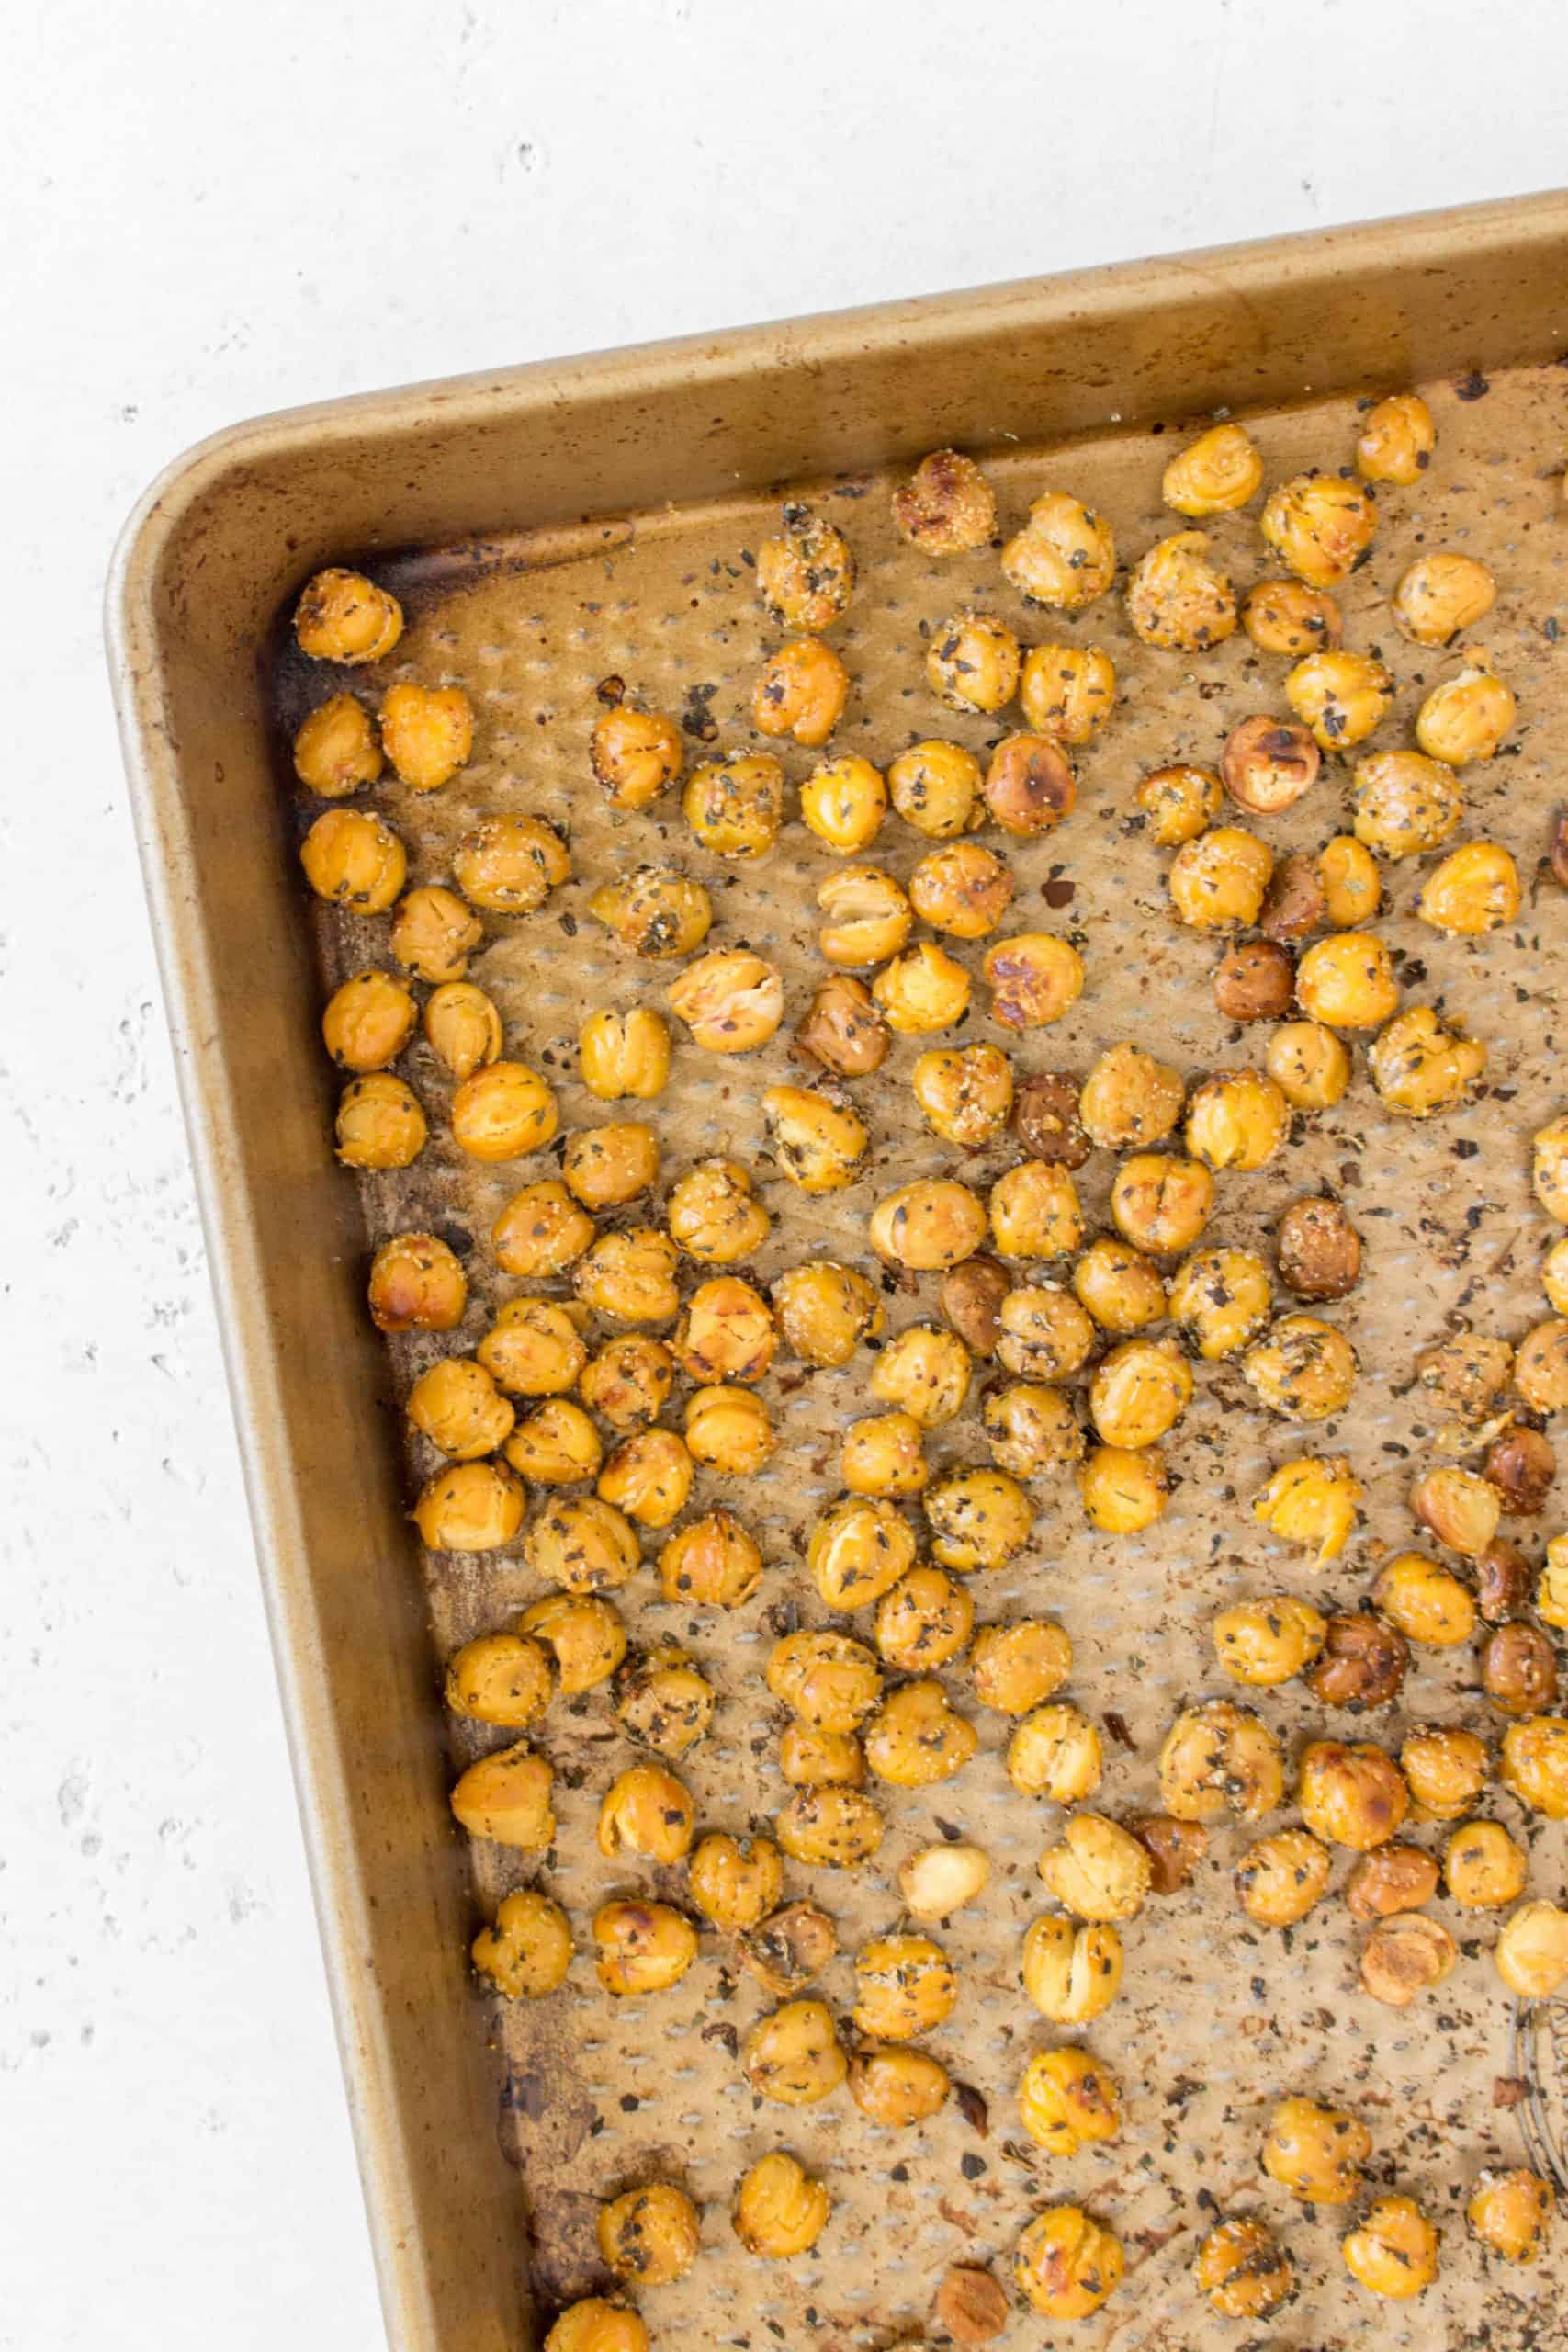 Roasted chickpeas with garlic and basil in a sheet pan.